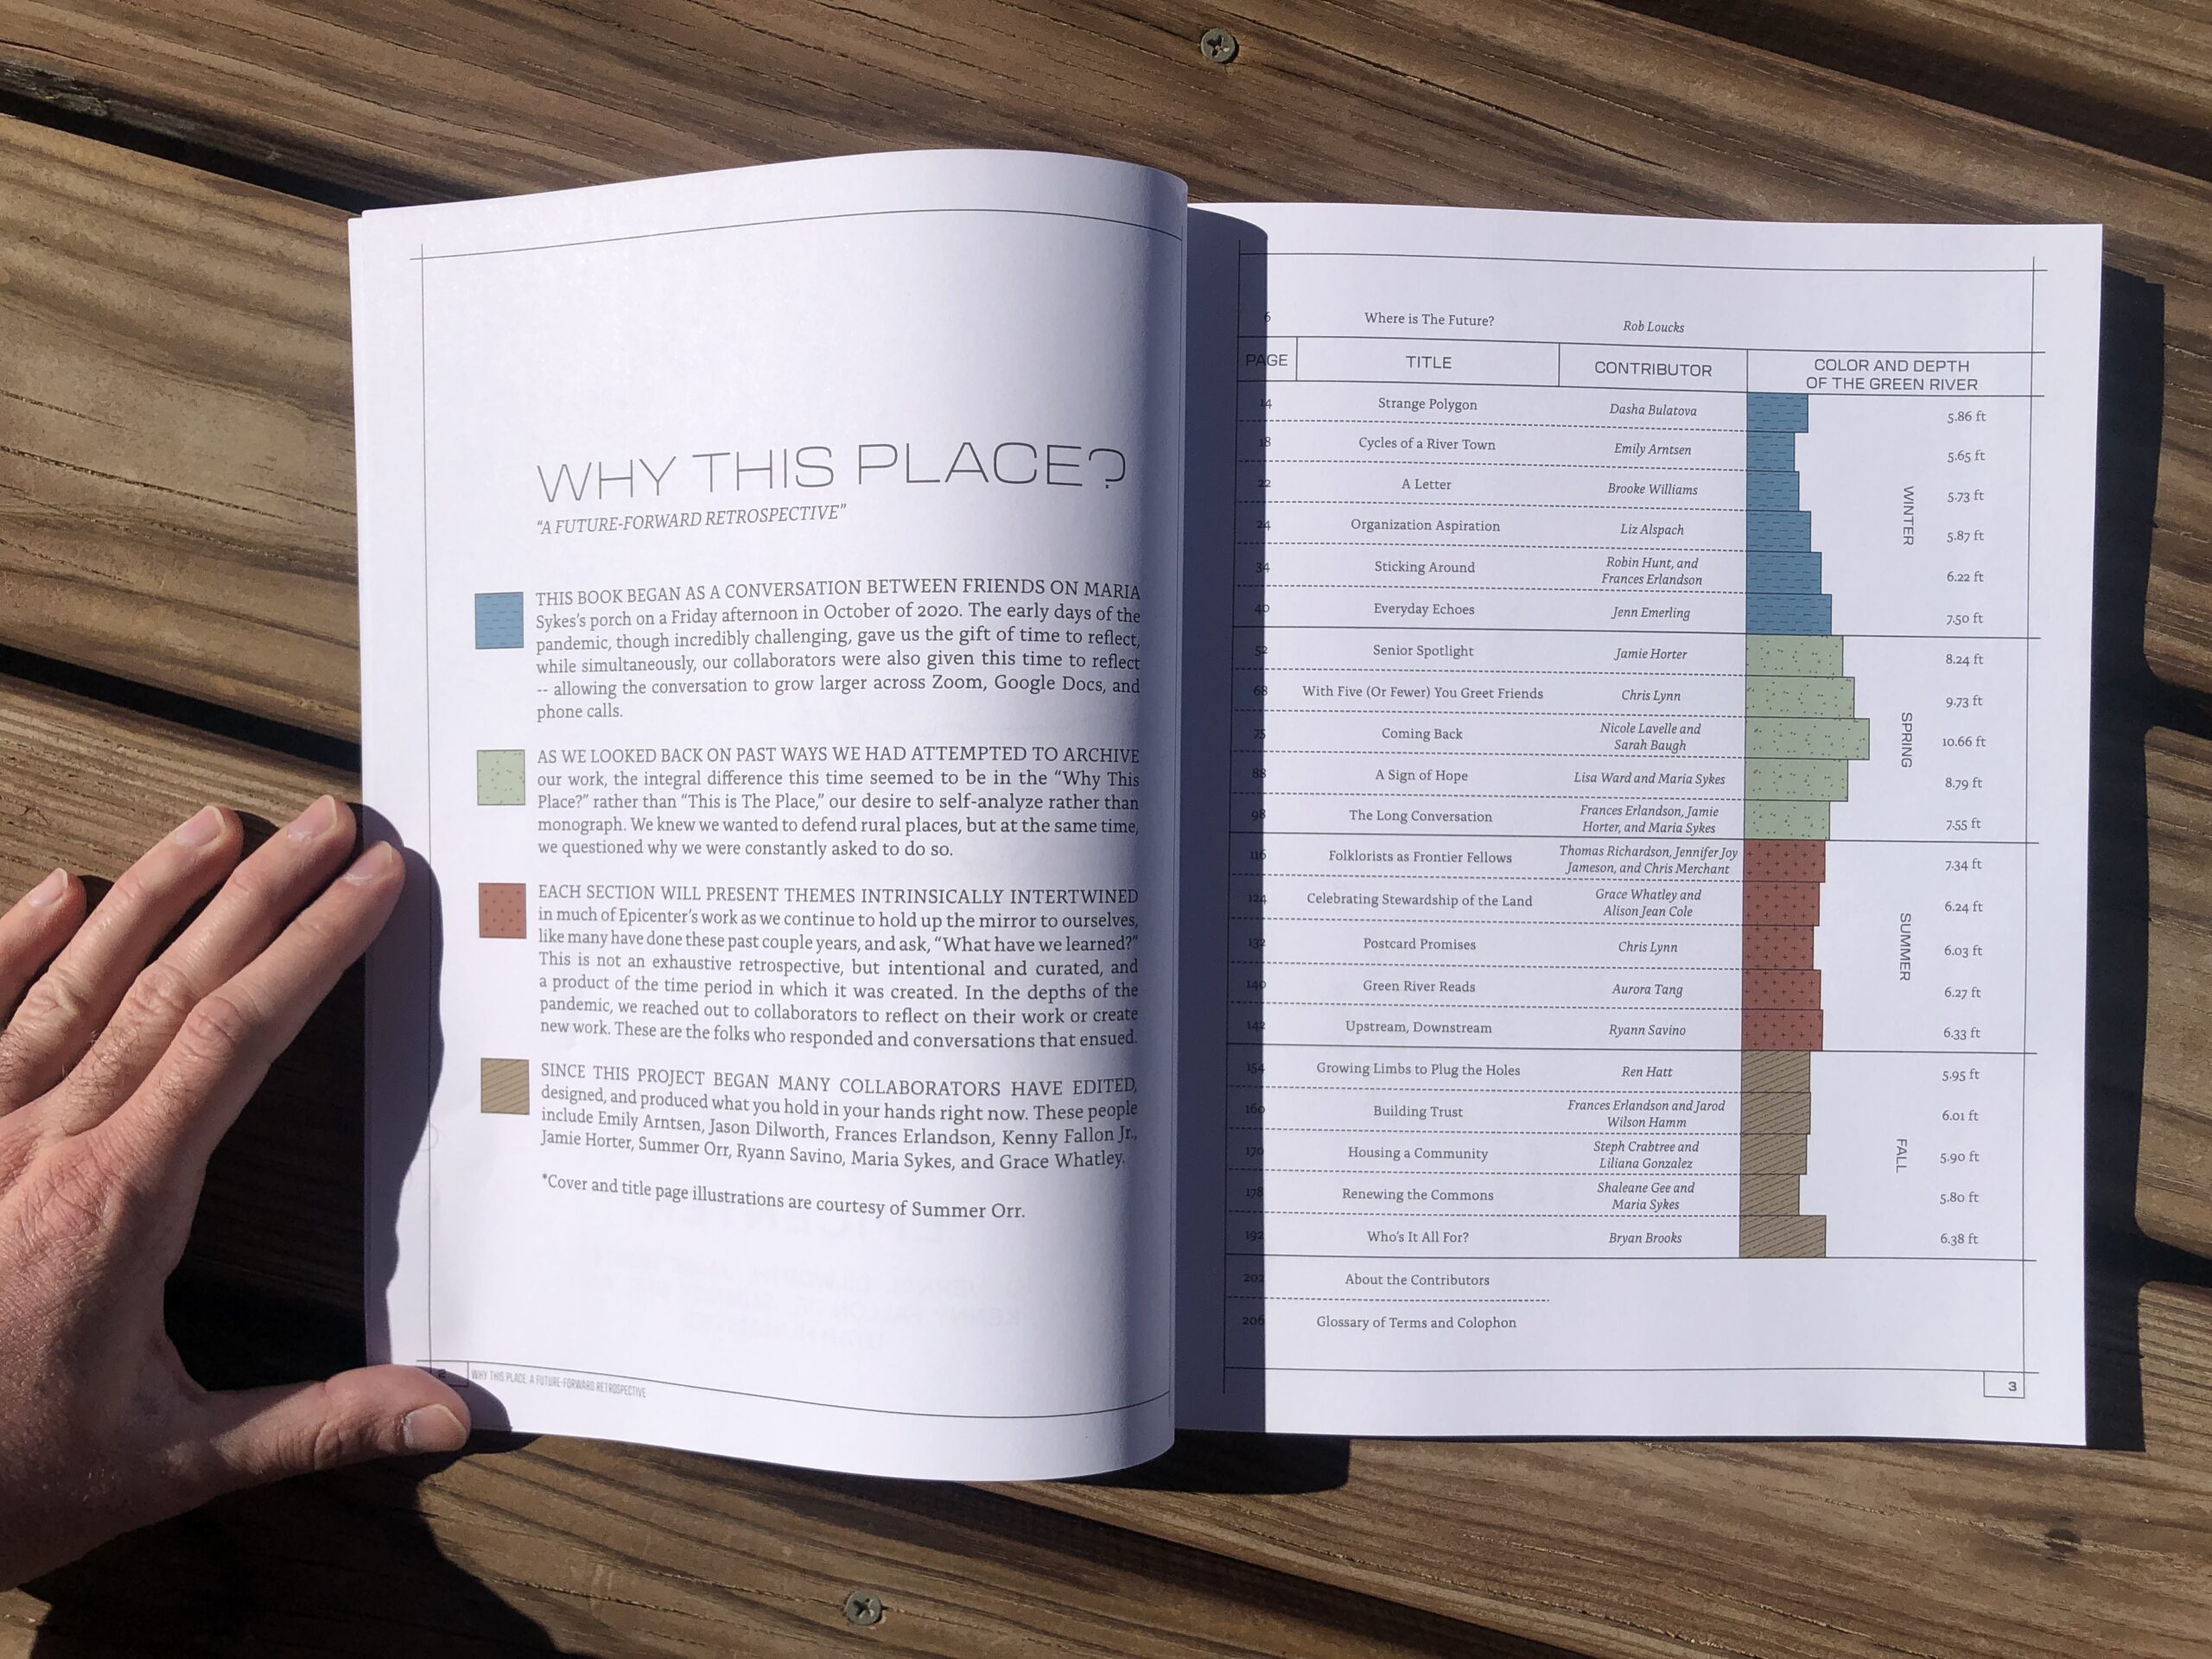 Book introduction and table of contents in the Why This Place book in the style of a scientific field report or guide. The colors and bar lengths reflect the seasonal colors and depth of the Green River as it passes through town.